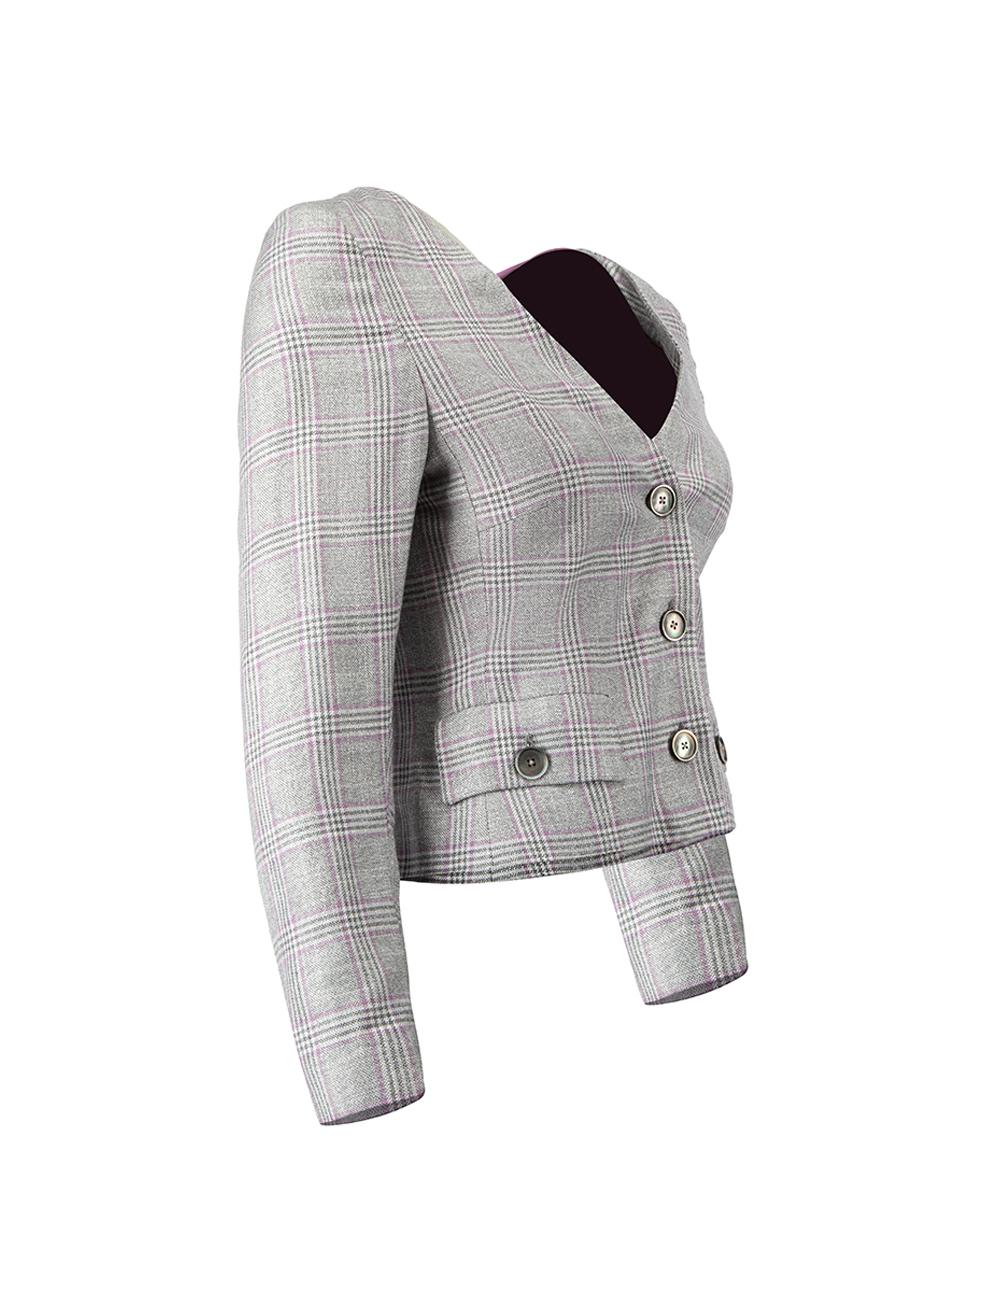 CONDITION is Never Worn. No visible wear to jacket is evident on this used Sanne designer sample item. 
 
 Details
  Designer sample item
 Grey
 Wool
 Cropped jacket
 Tartan pattern
 Single breasted
 Buttoned cuffs
 Front side pockets with buttoned